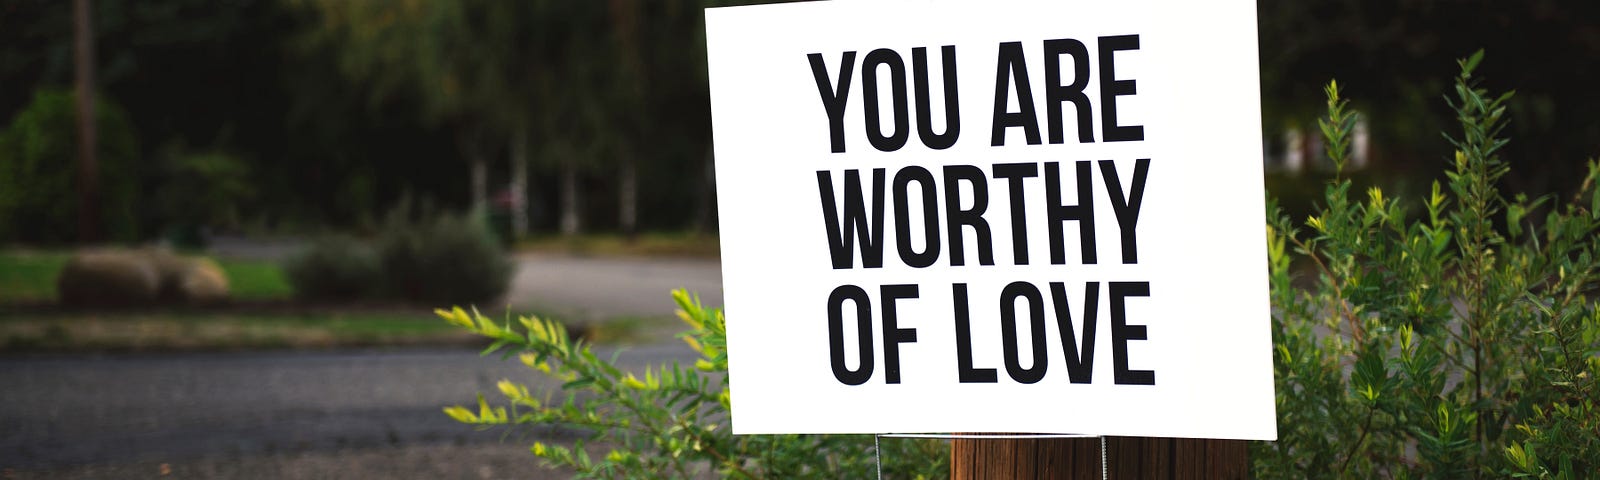 White sign with black words “you are worthy of love”